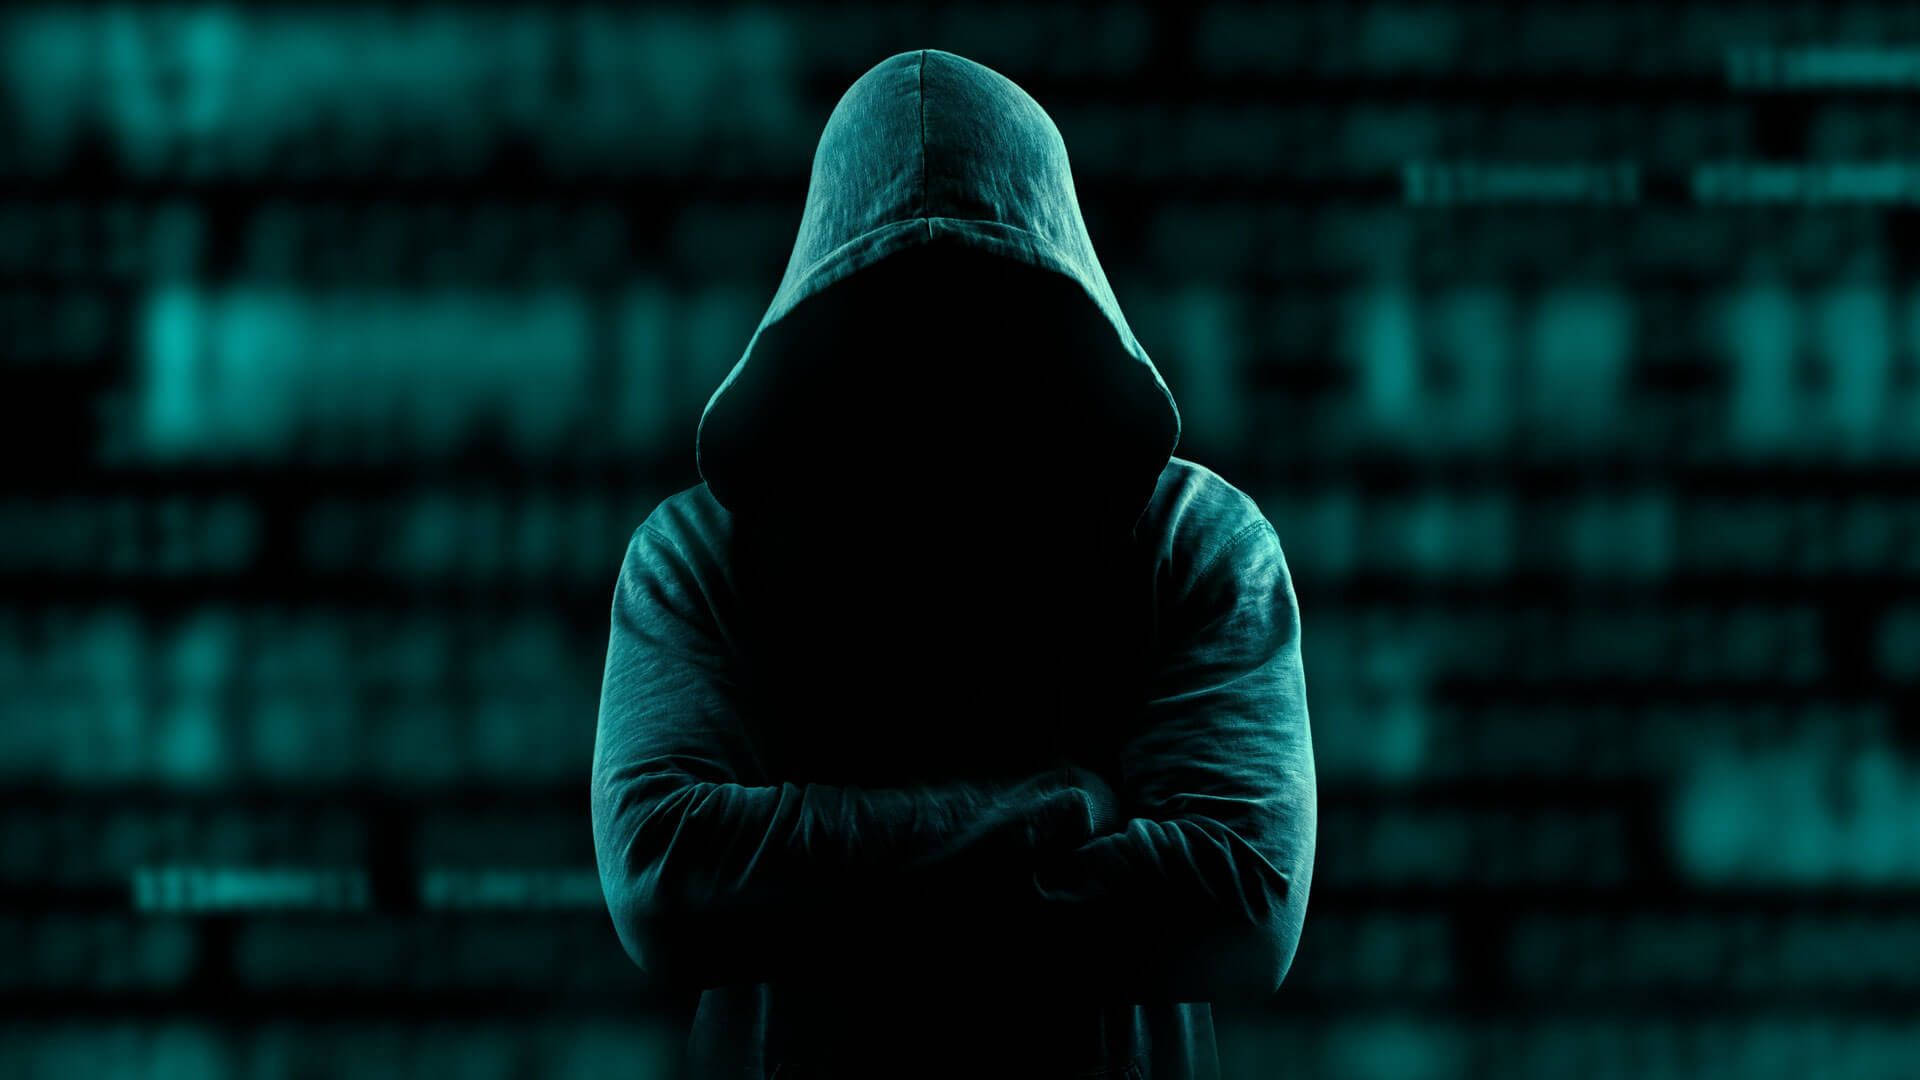 Anonymous Hacker Full Hd Background